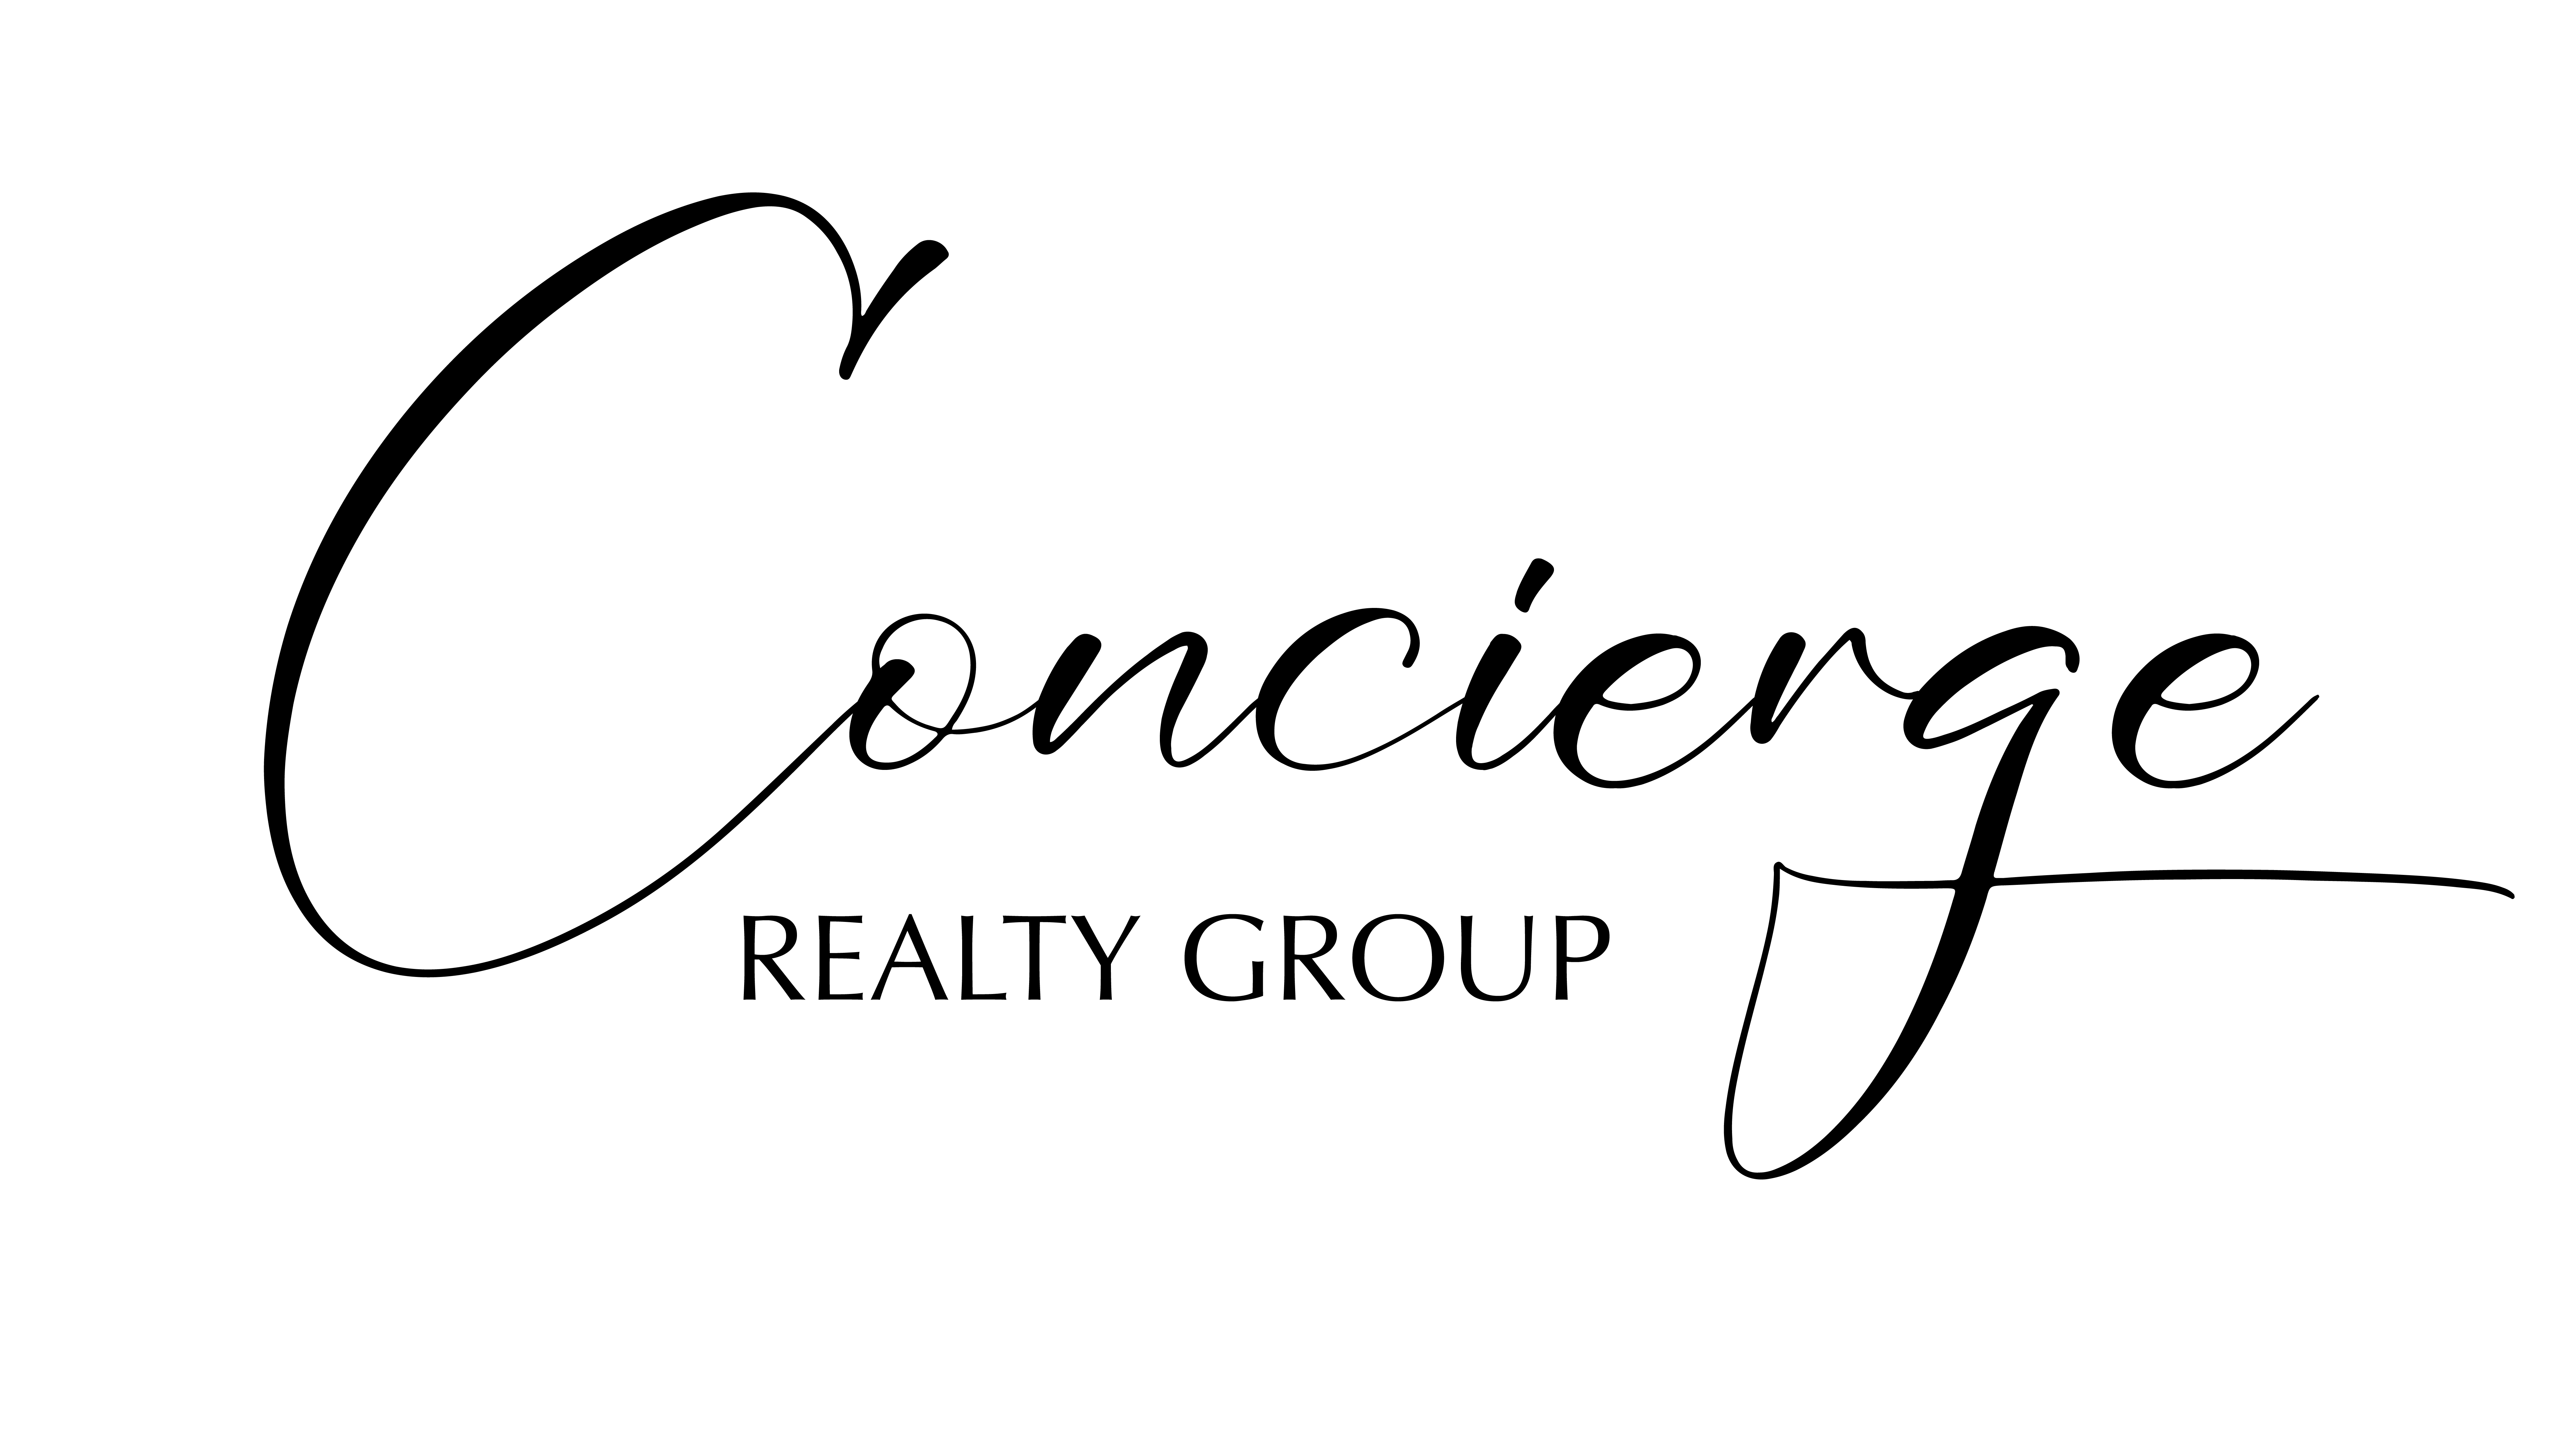 Concierge Realty Group